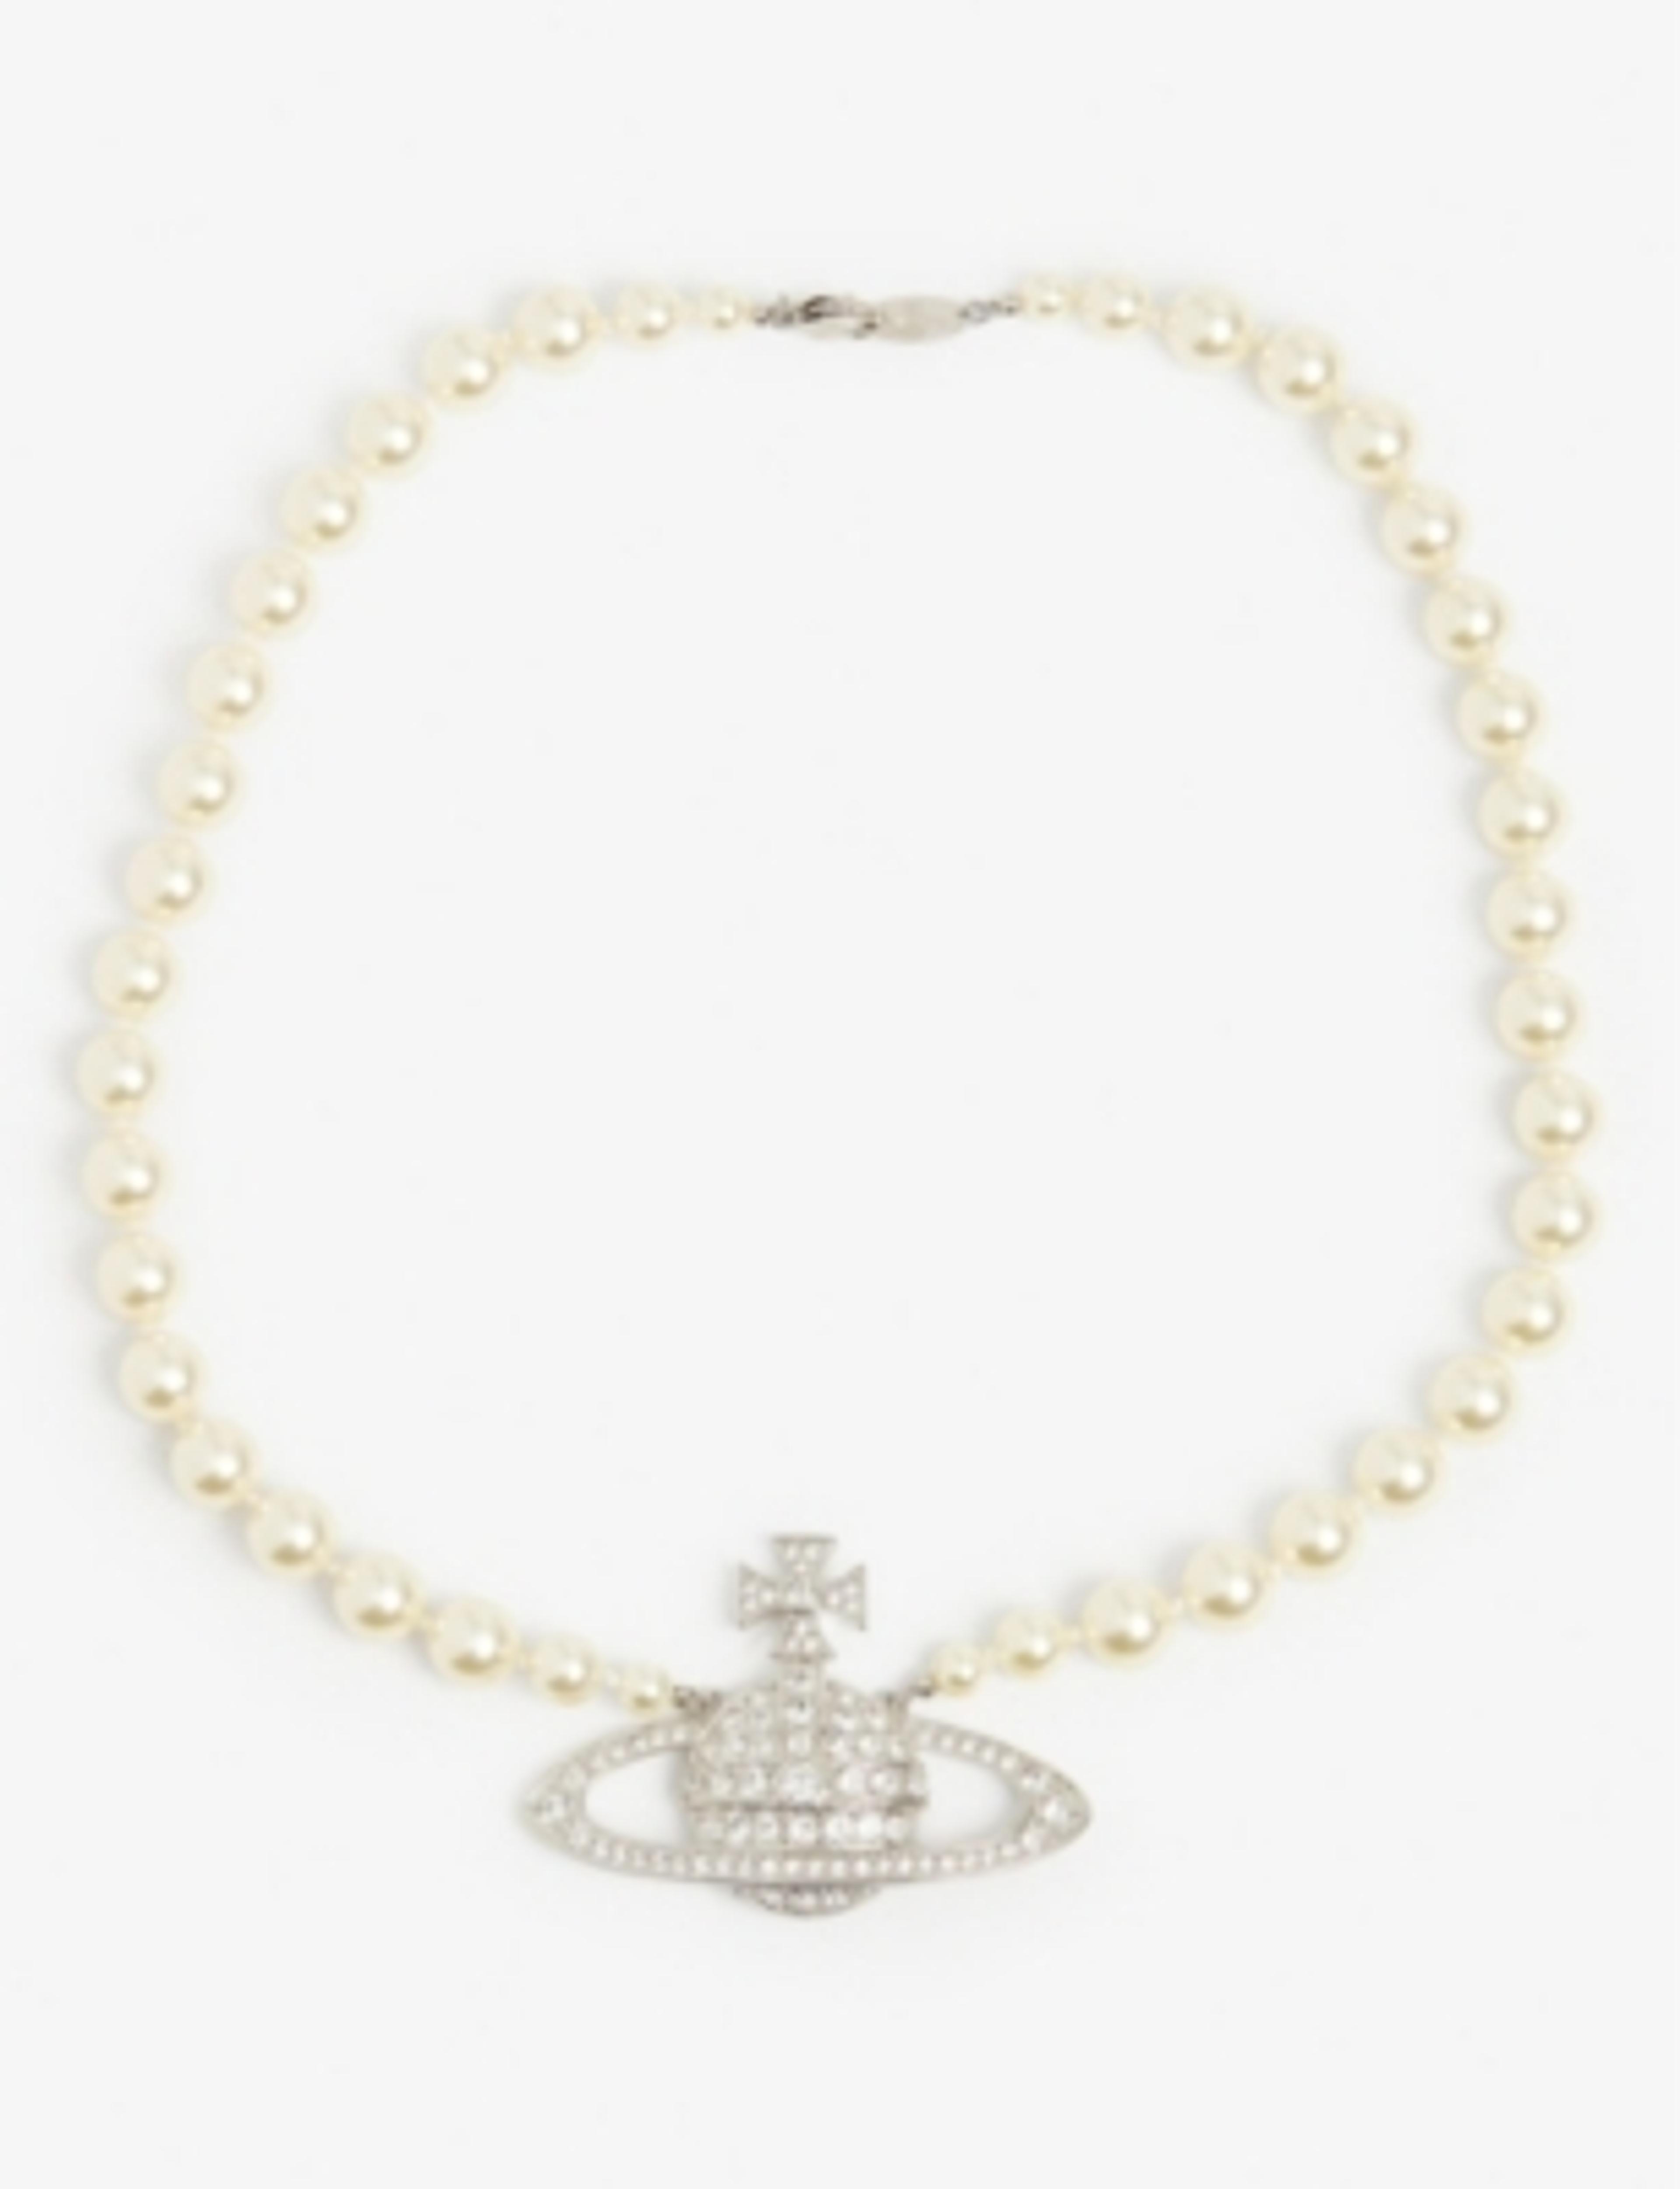 VIVIENNE WESTWOOD Bas Relief orb-pendant brass, Swarovski crystals and pearl necklace